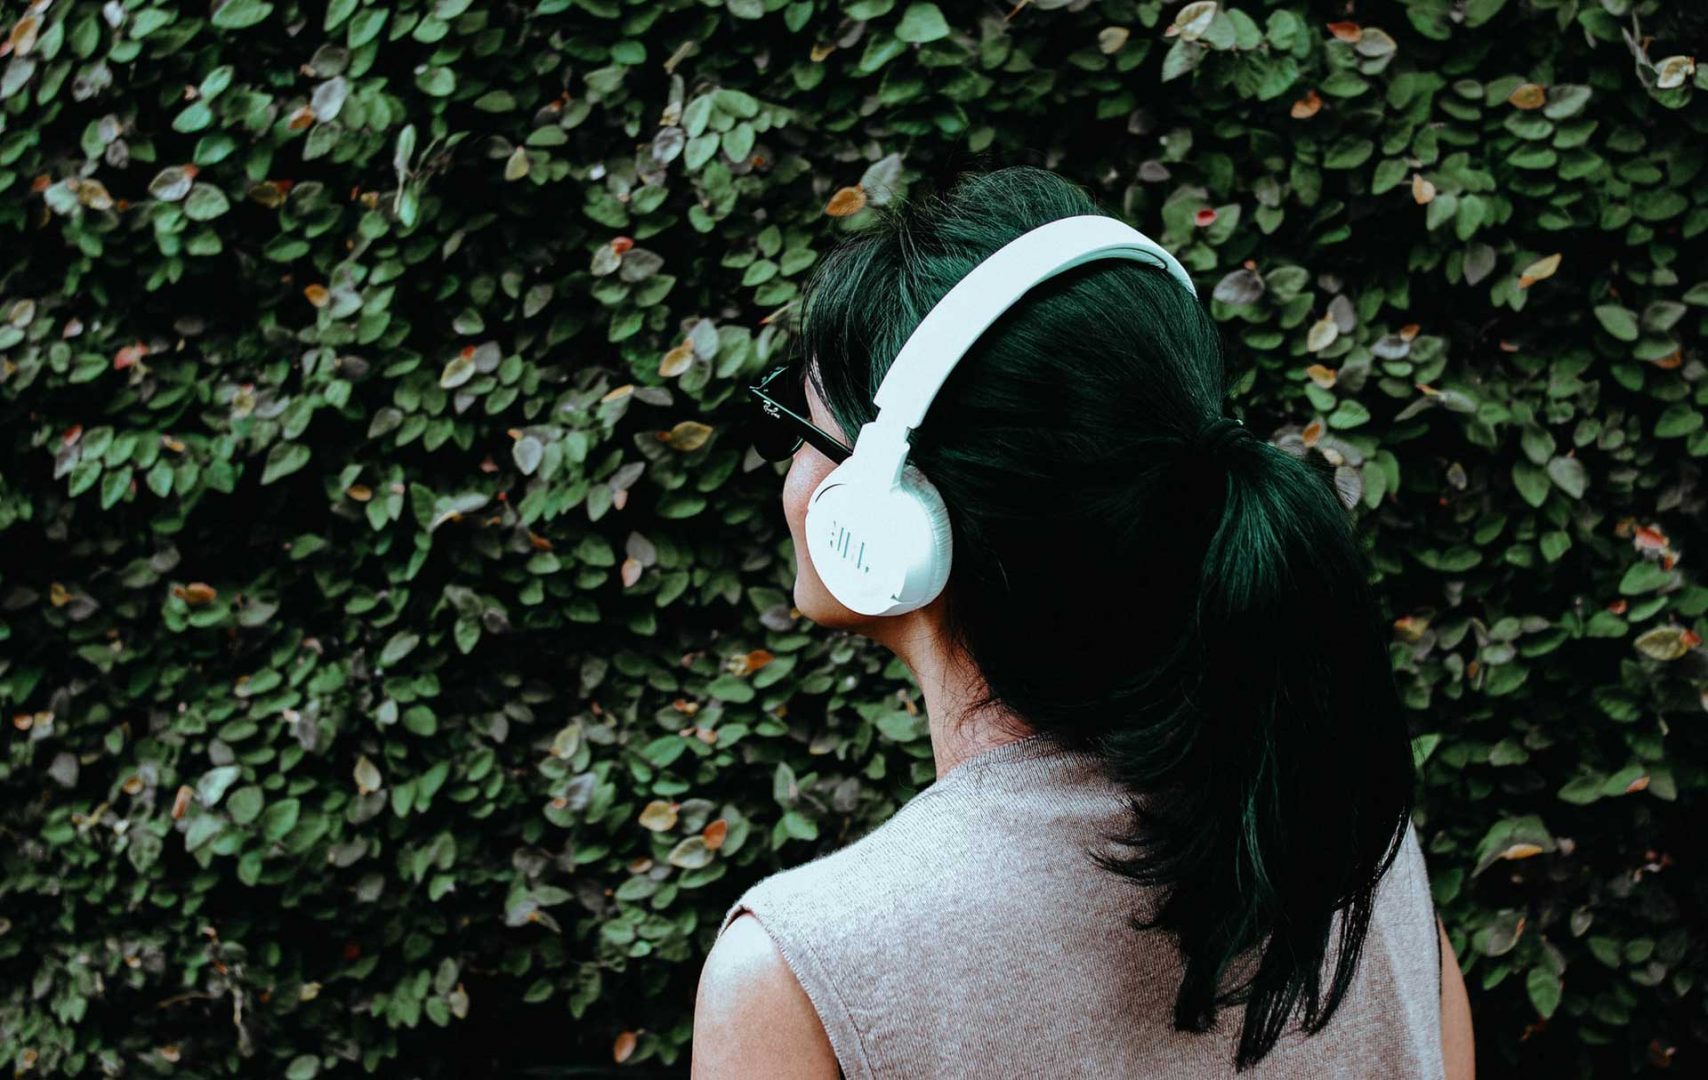 A woman wears large headphones as she faces a leafy hedge